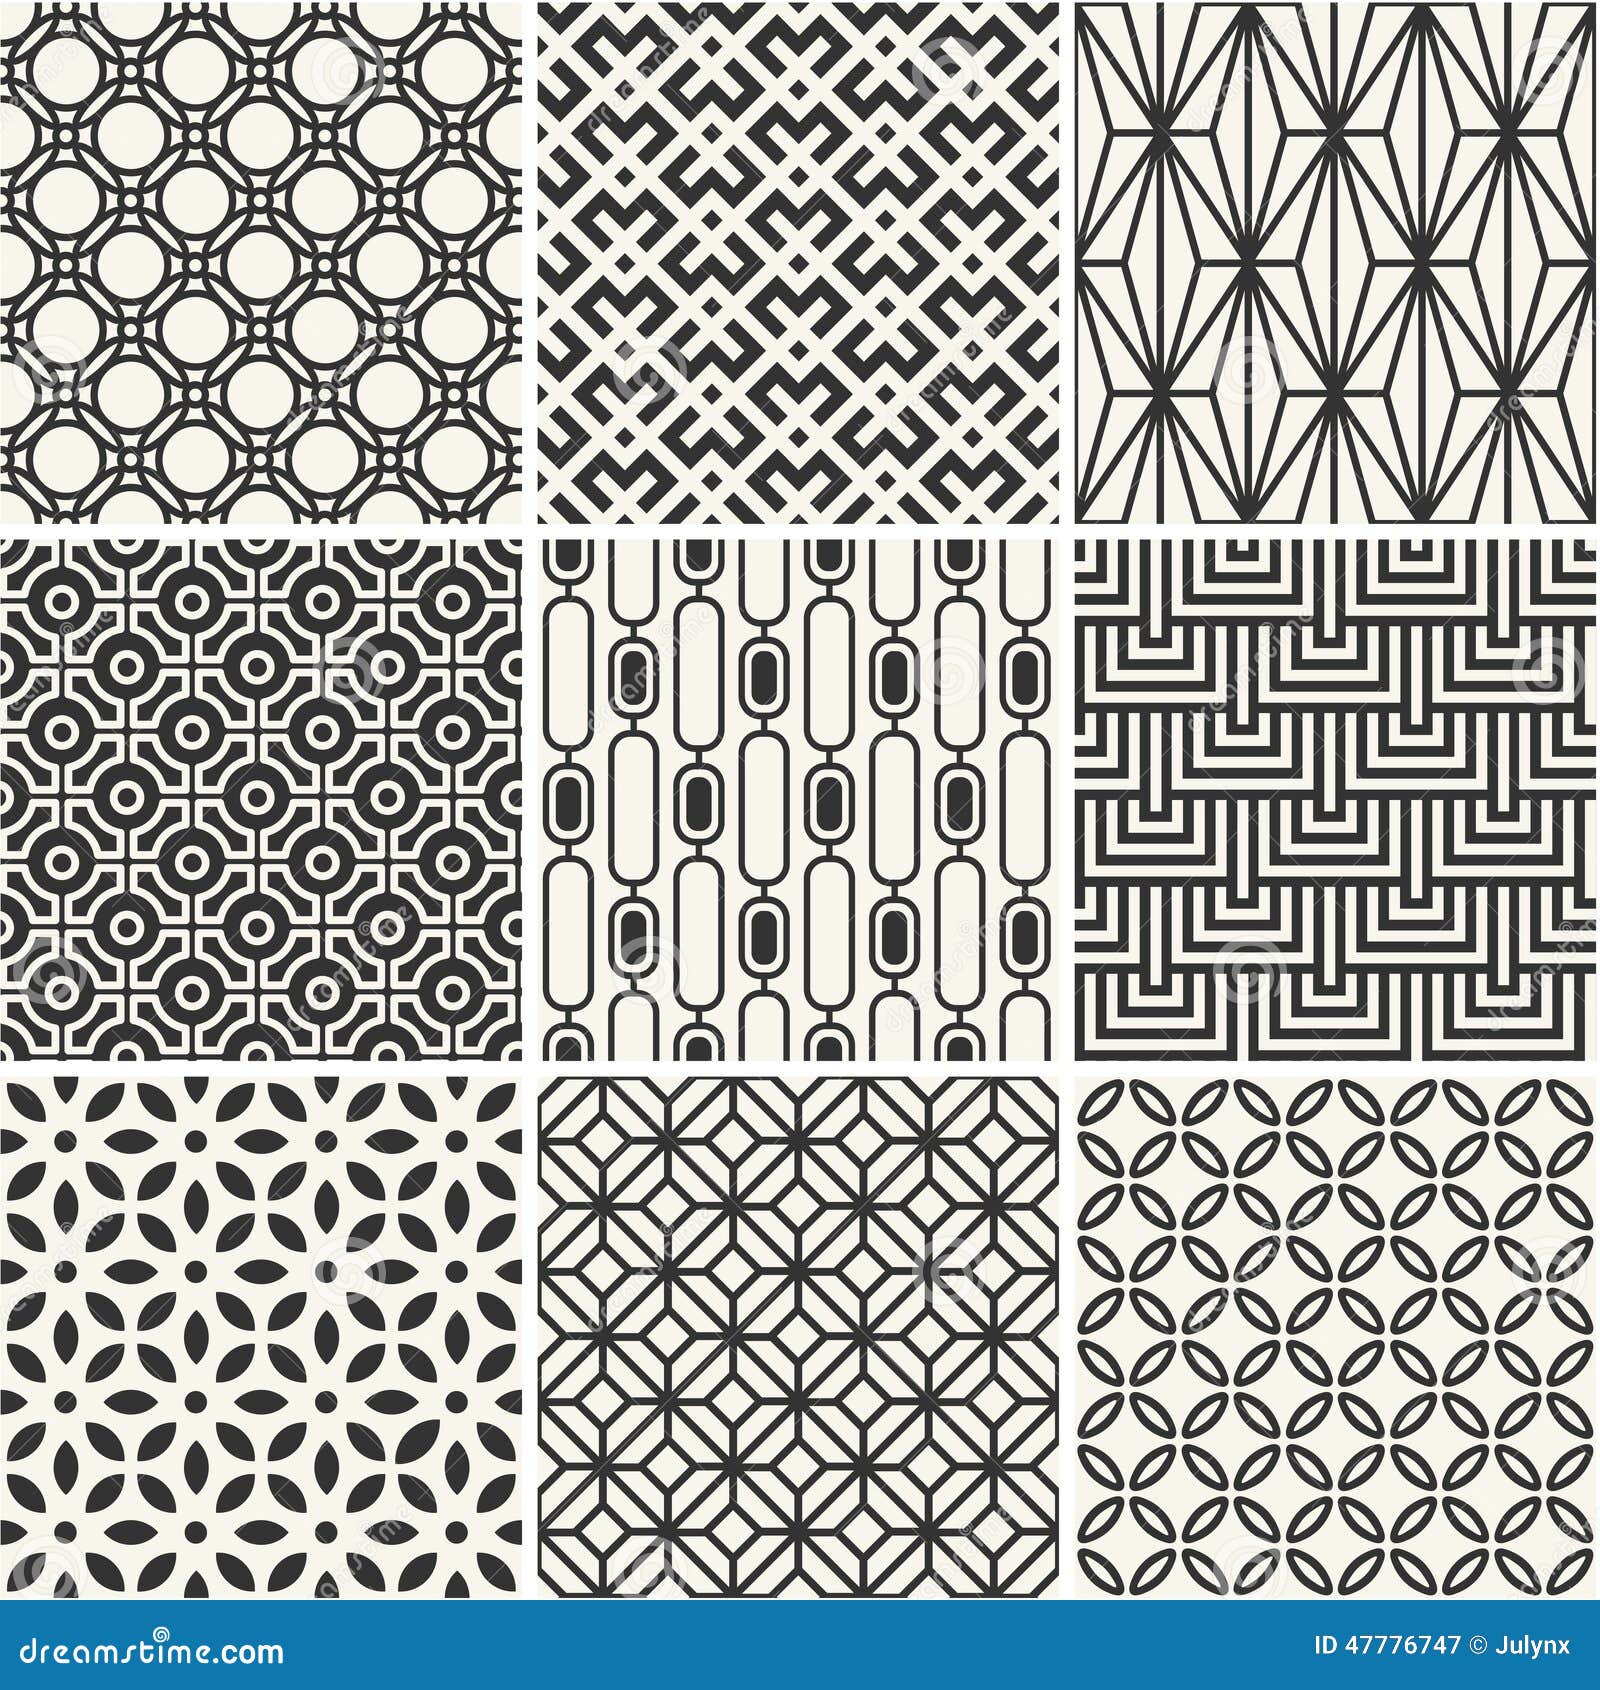 Pattern: Over 27,311,591 Royalty-Free Licensable Stock Vectors & Vector Art